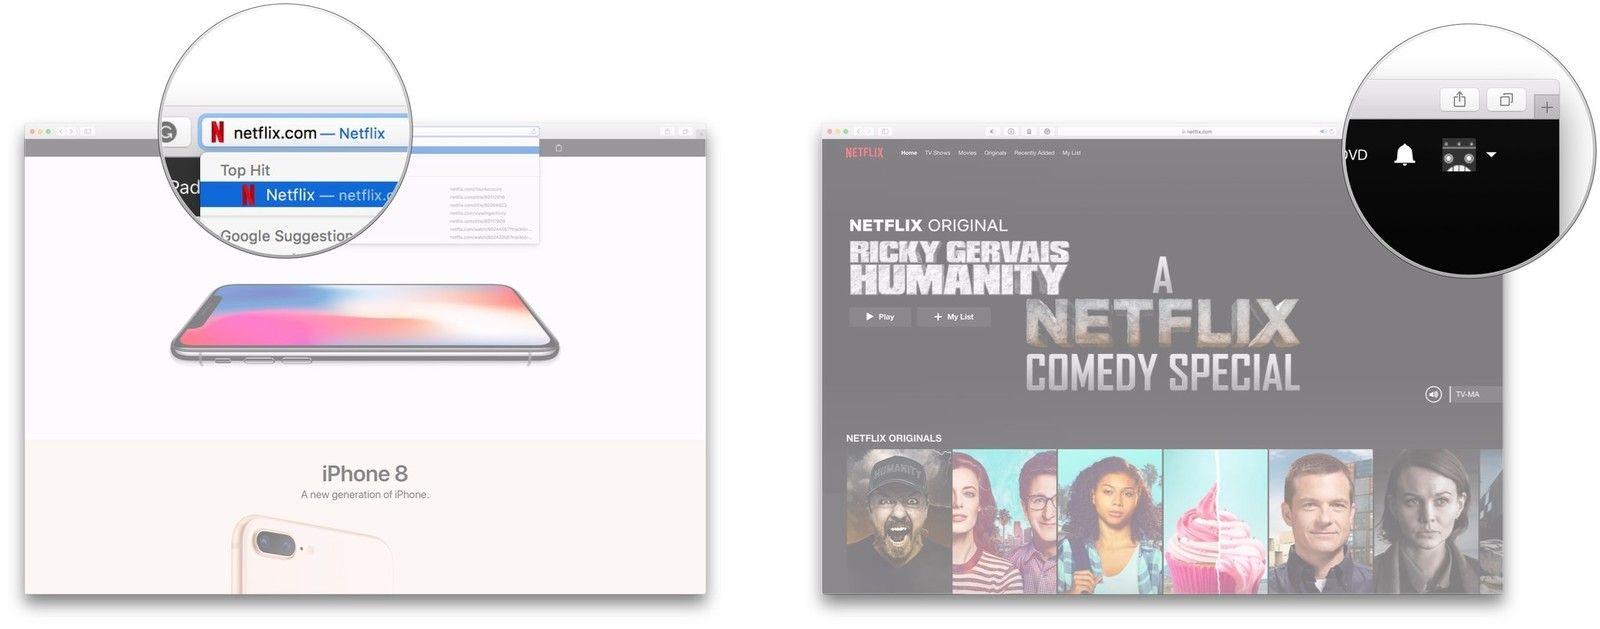 Netflix Clear Logo - How to clear your viewing history in Netflix | iMore